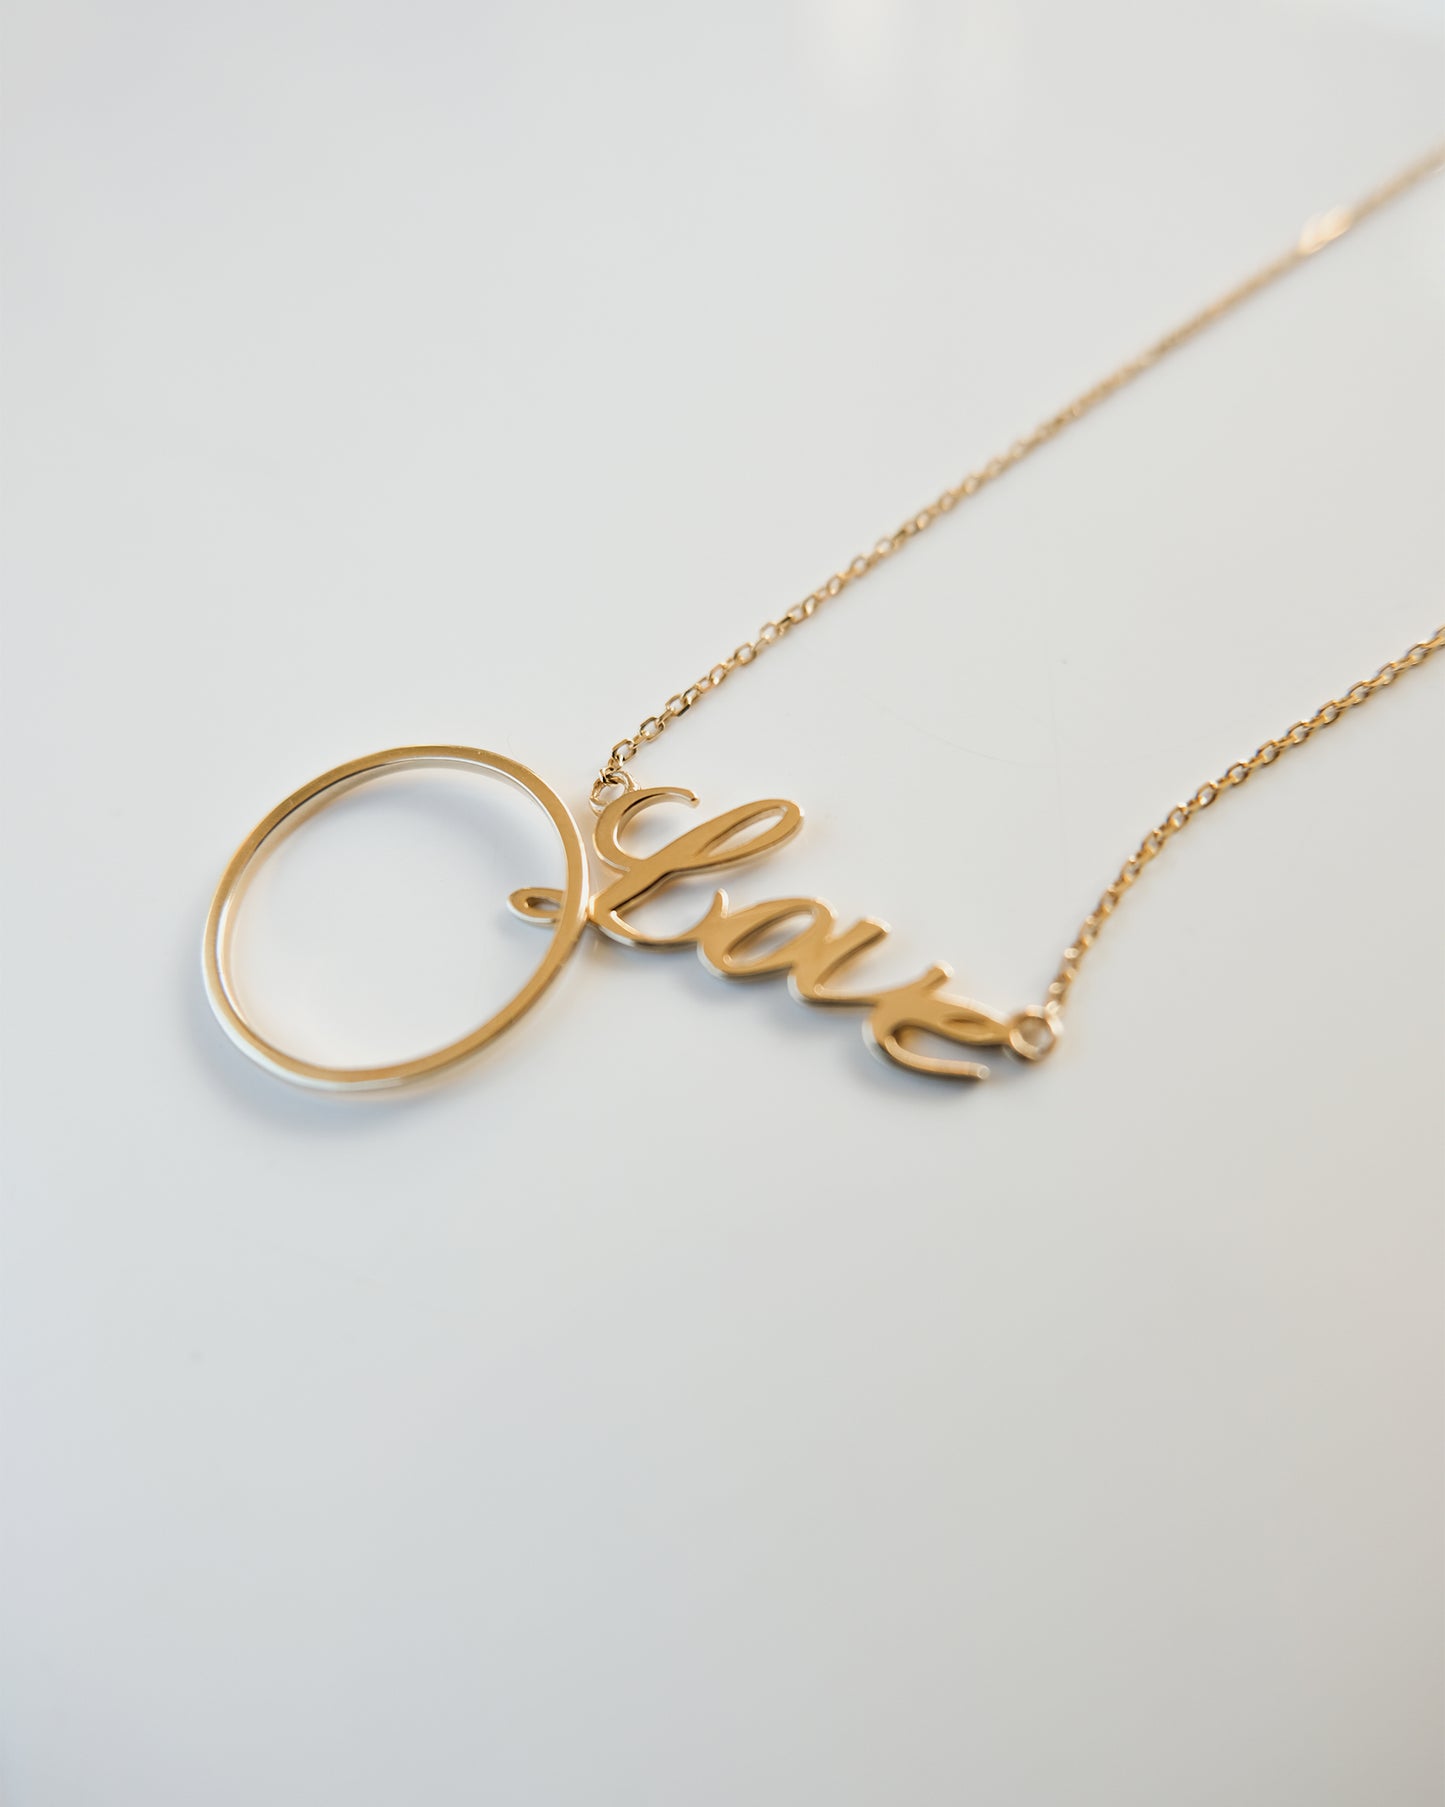 14k Gold "Hand Writing - Love" Necklace